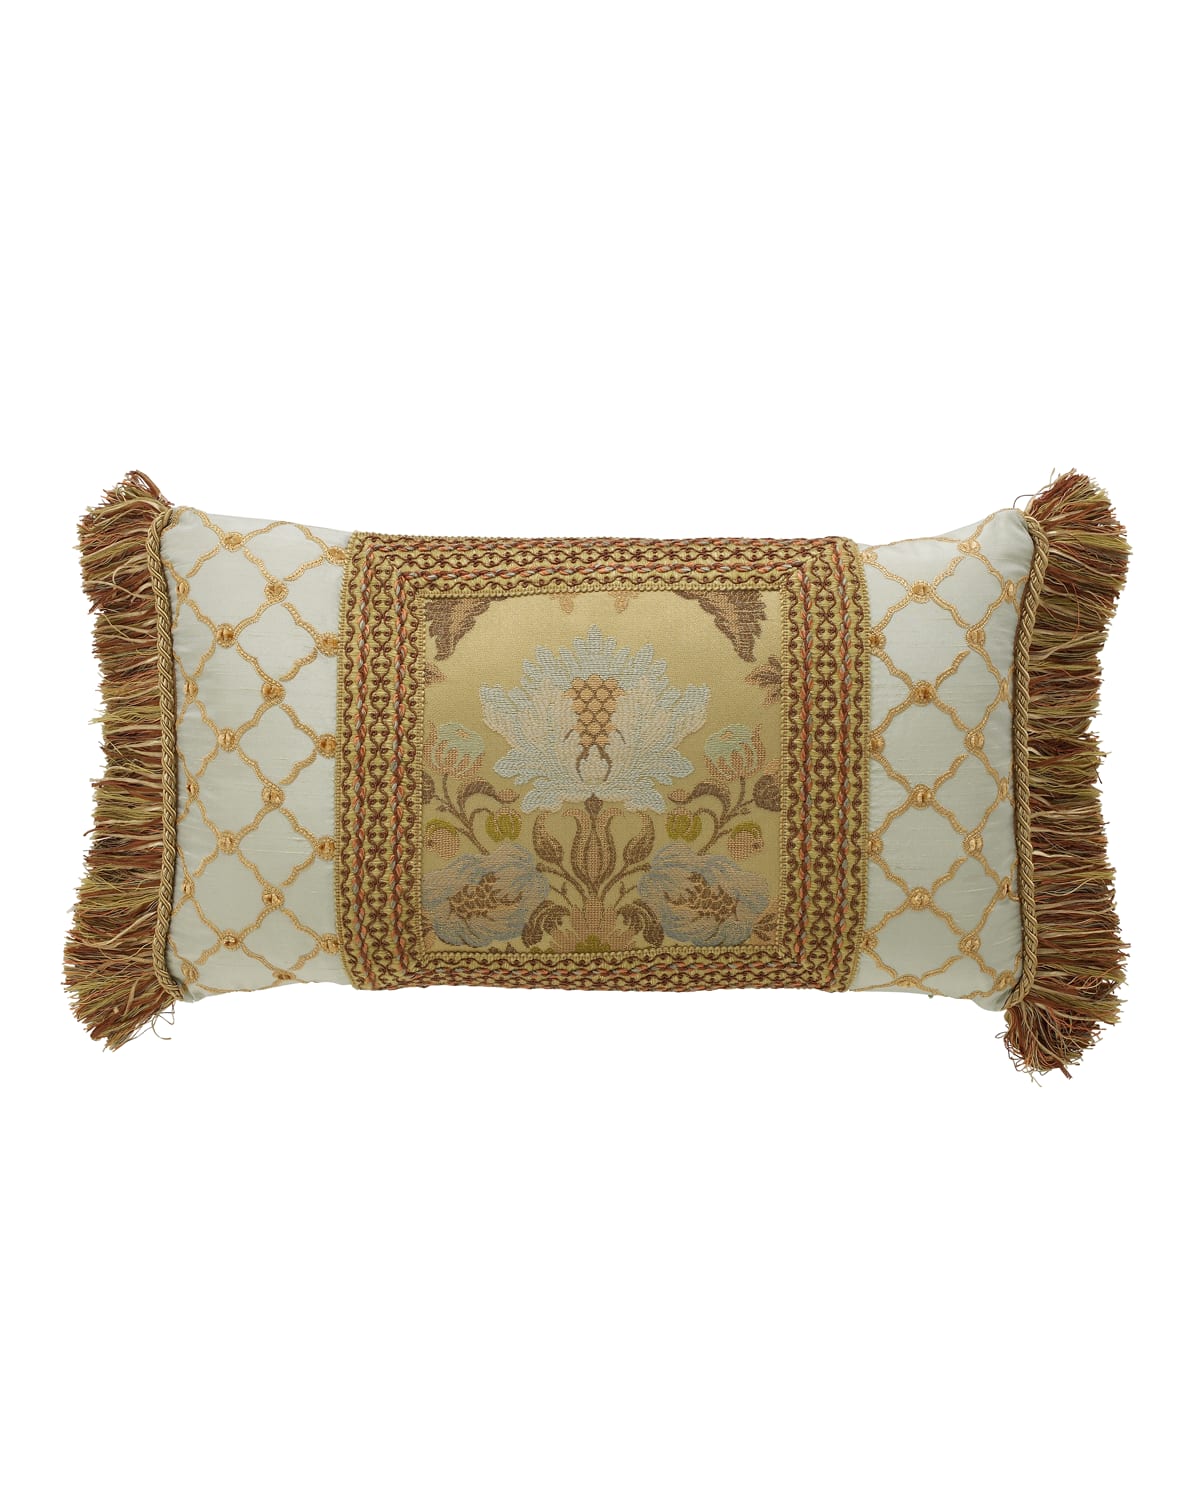 Image Dian Austin Couture Home Petit Trianon Pieced Pillow with Side Fringe, 15" x 26"